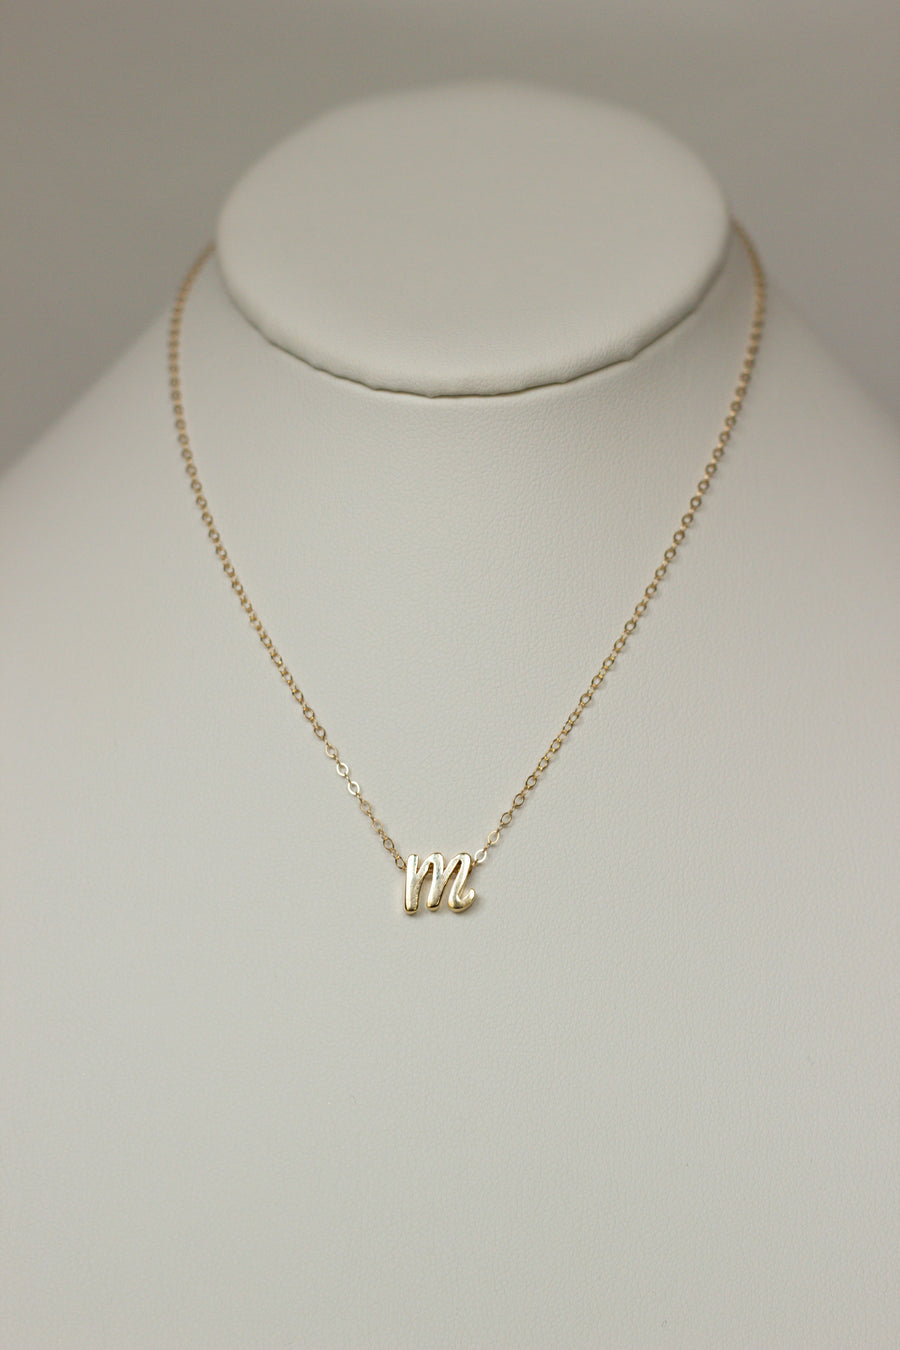 Initial Necklace, Letter Necklace, Handmade Jewelry, Personalized Jewelry, Gift for Her, Birthday Gift, Gold Jewelry, Silver, Christmas Gift